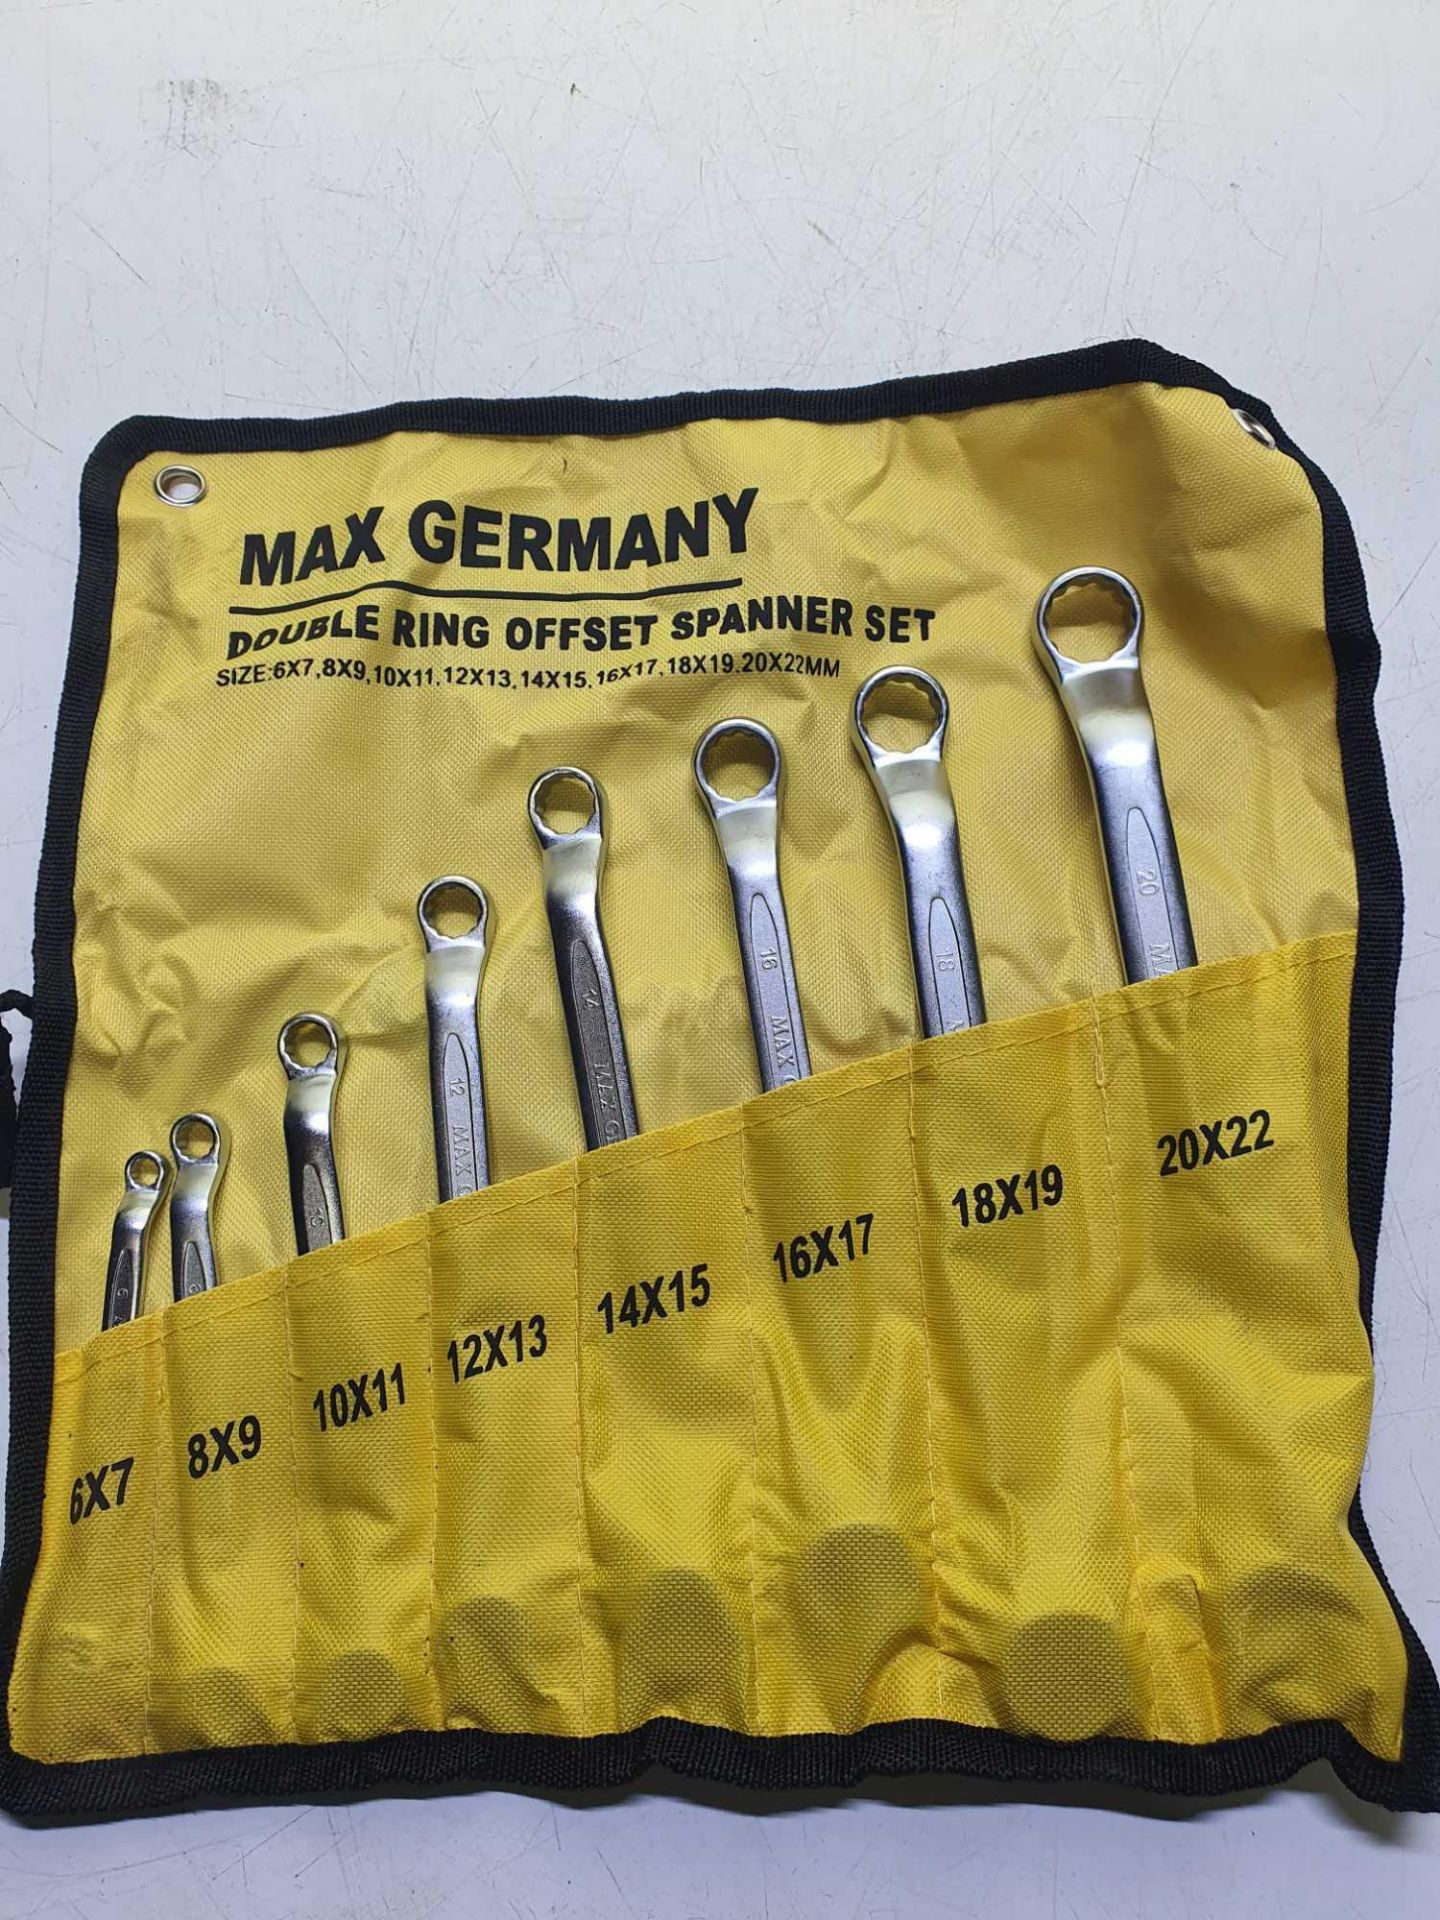 Max germany set of spanners